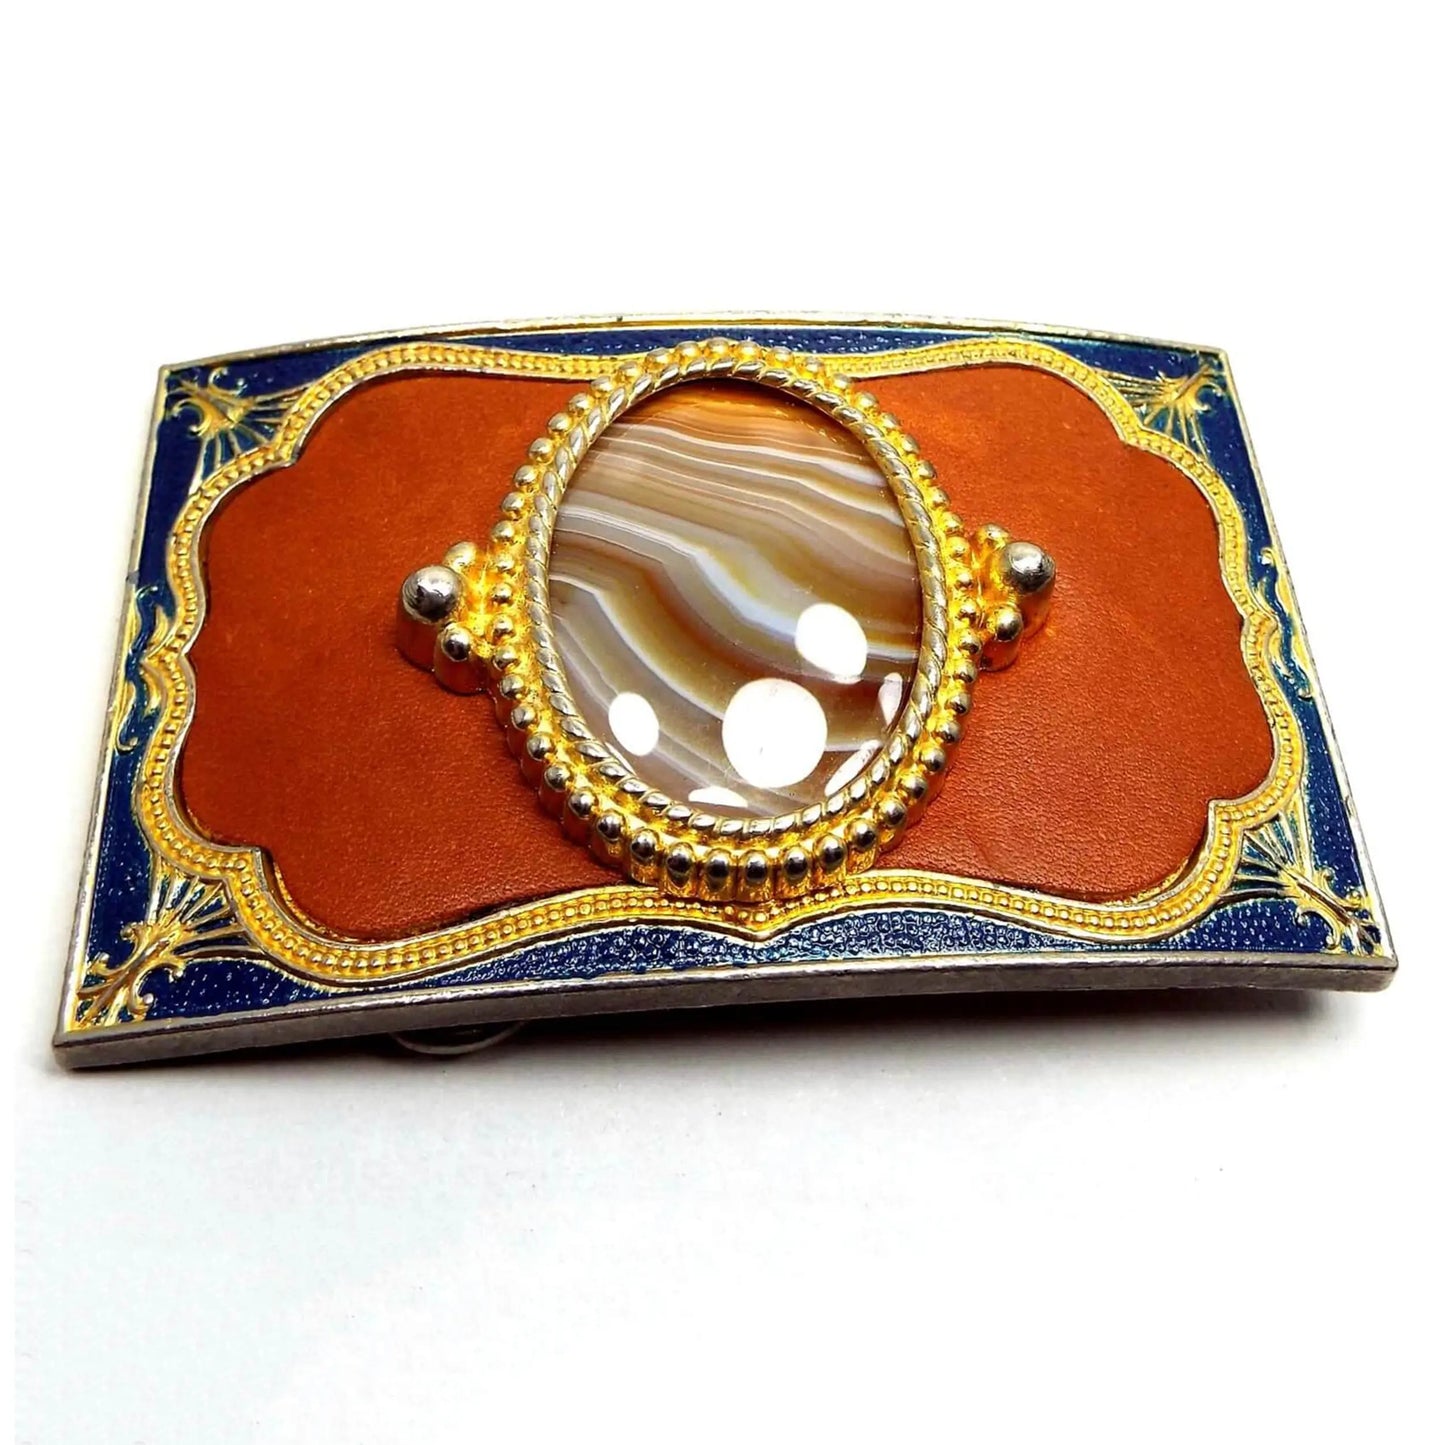 Front view of the retro vintage Southwestern style belt buckle. It is rectangle in shape with gold tone color metal. The outer edge is dark blue enameled. The inside area has dyed leather with an oval agate gemstone cab on top in shades of brown and white.